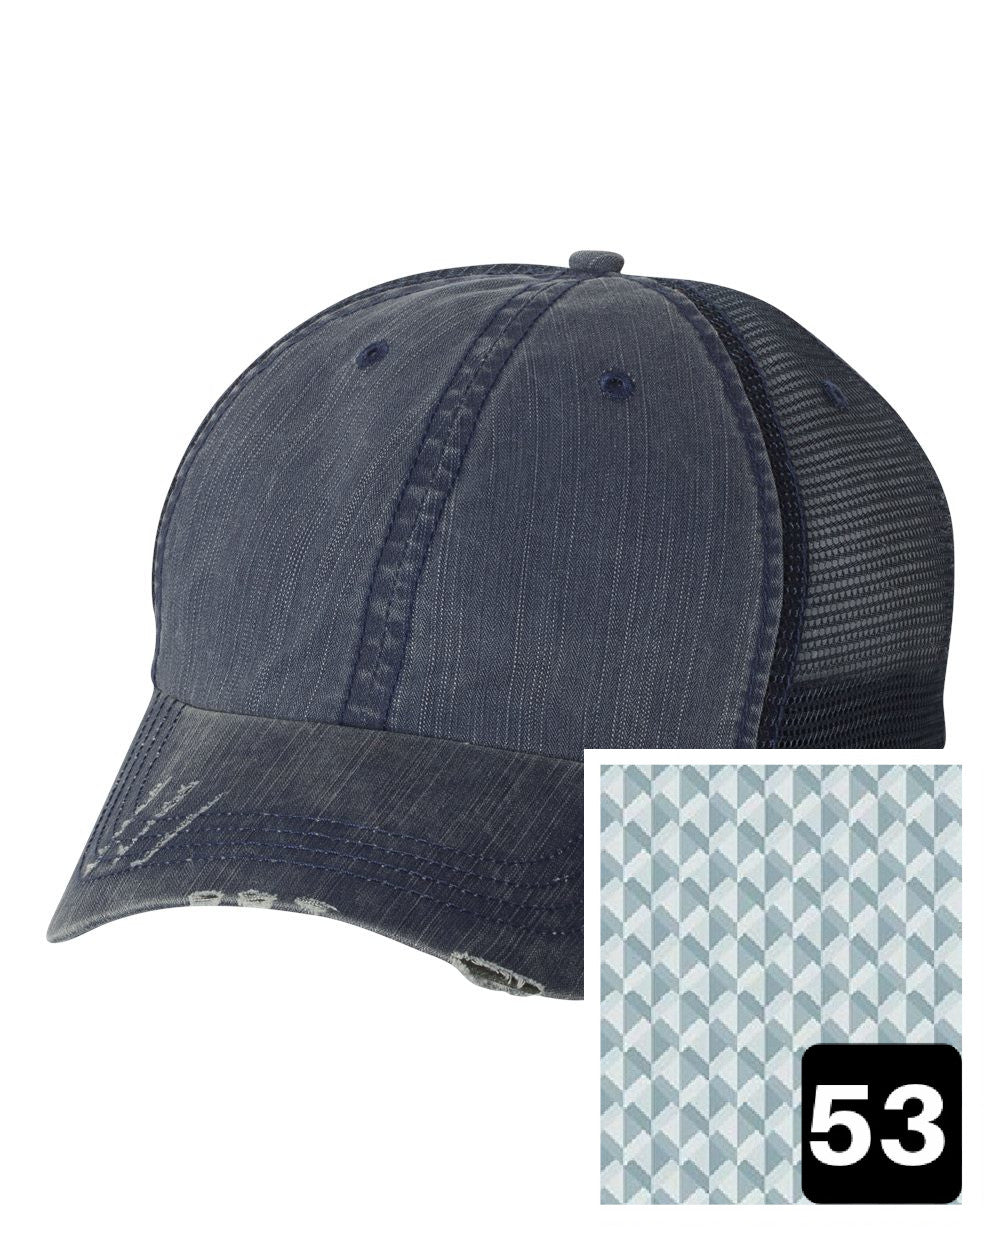 Delaware Hat | Navy Distressed Trucker Cap | Many Fabric Choices